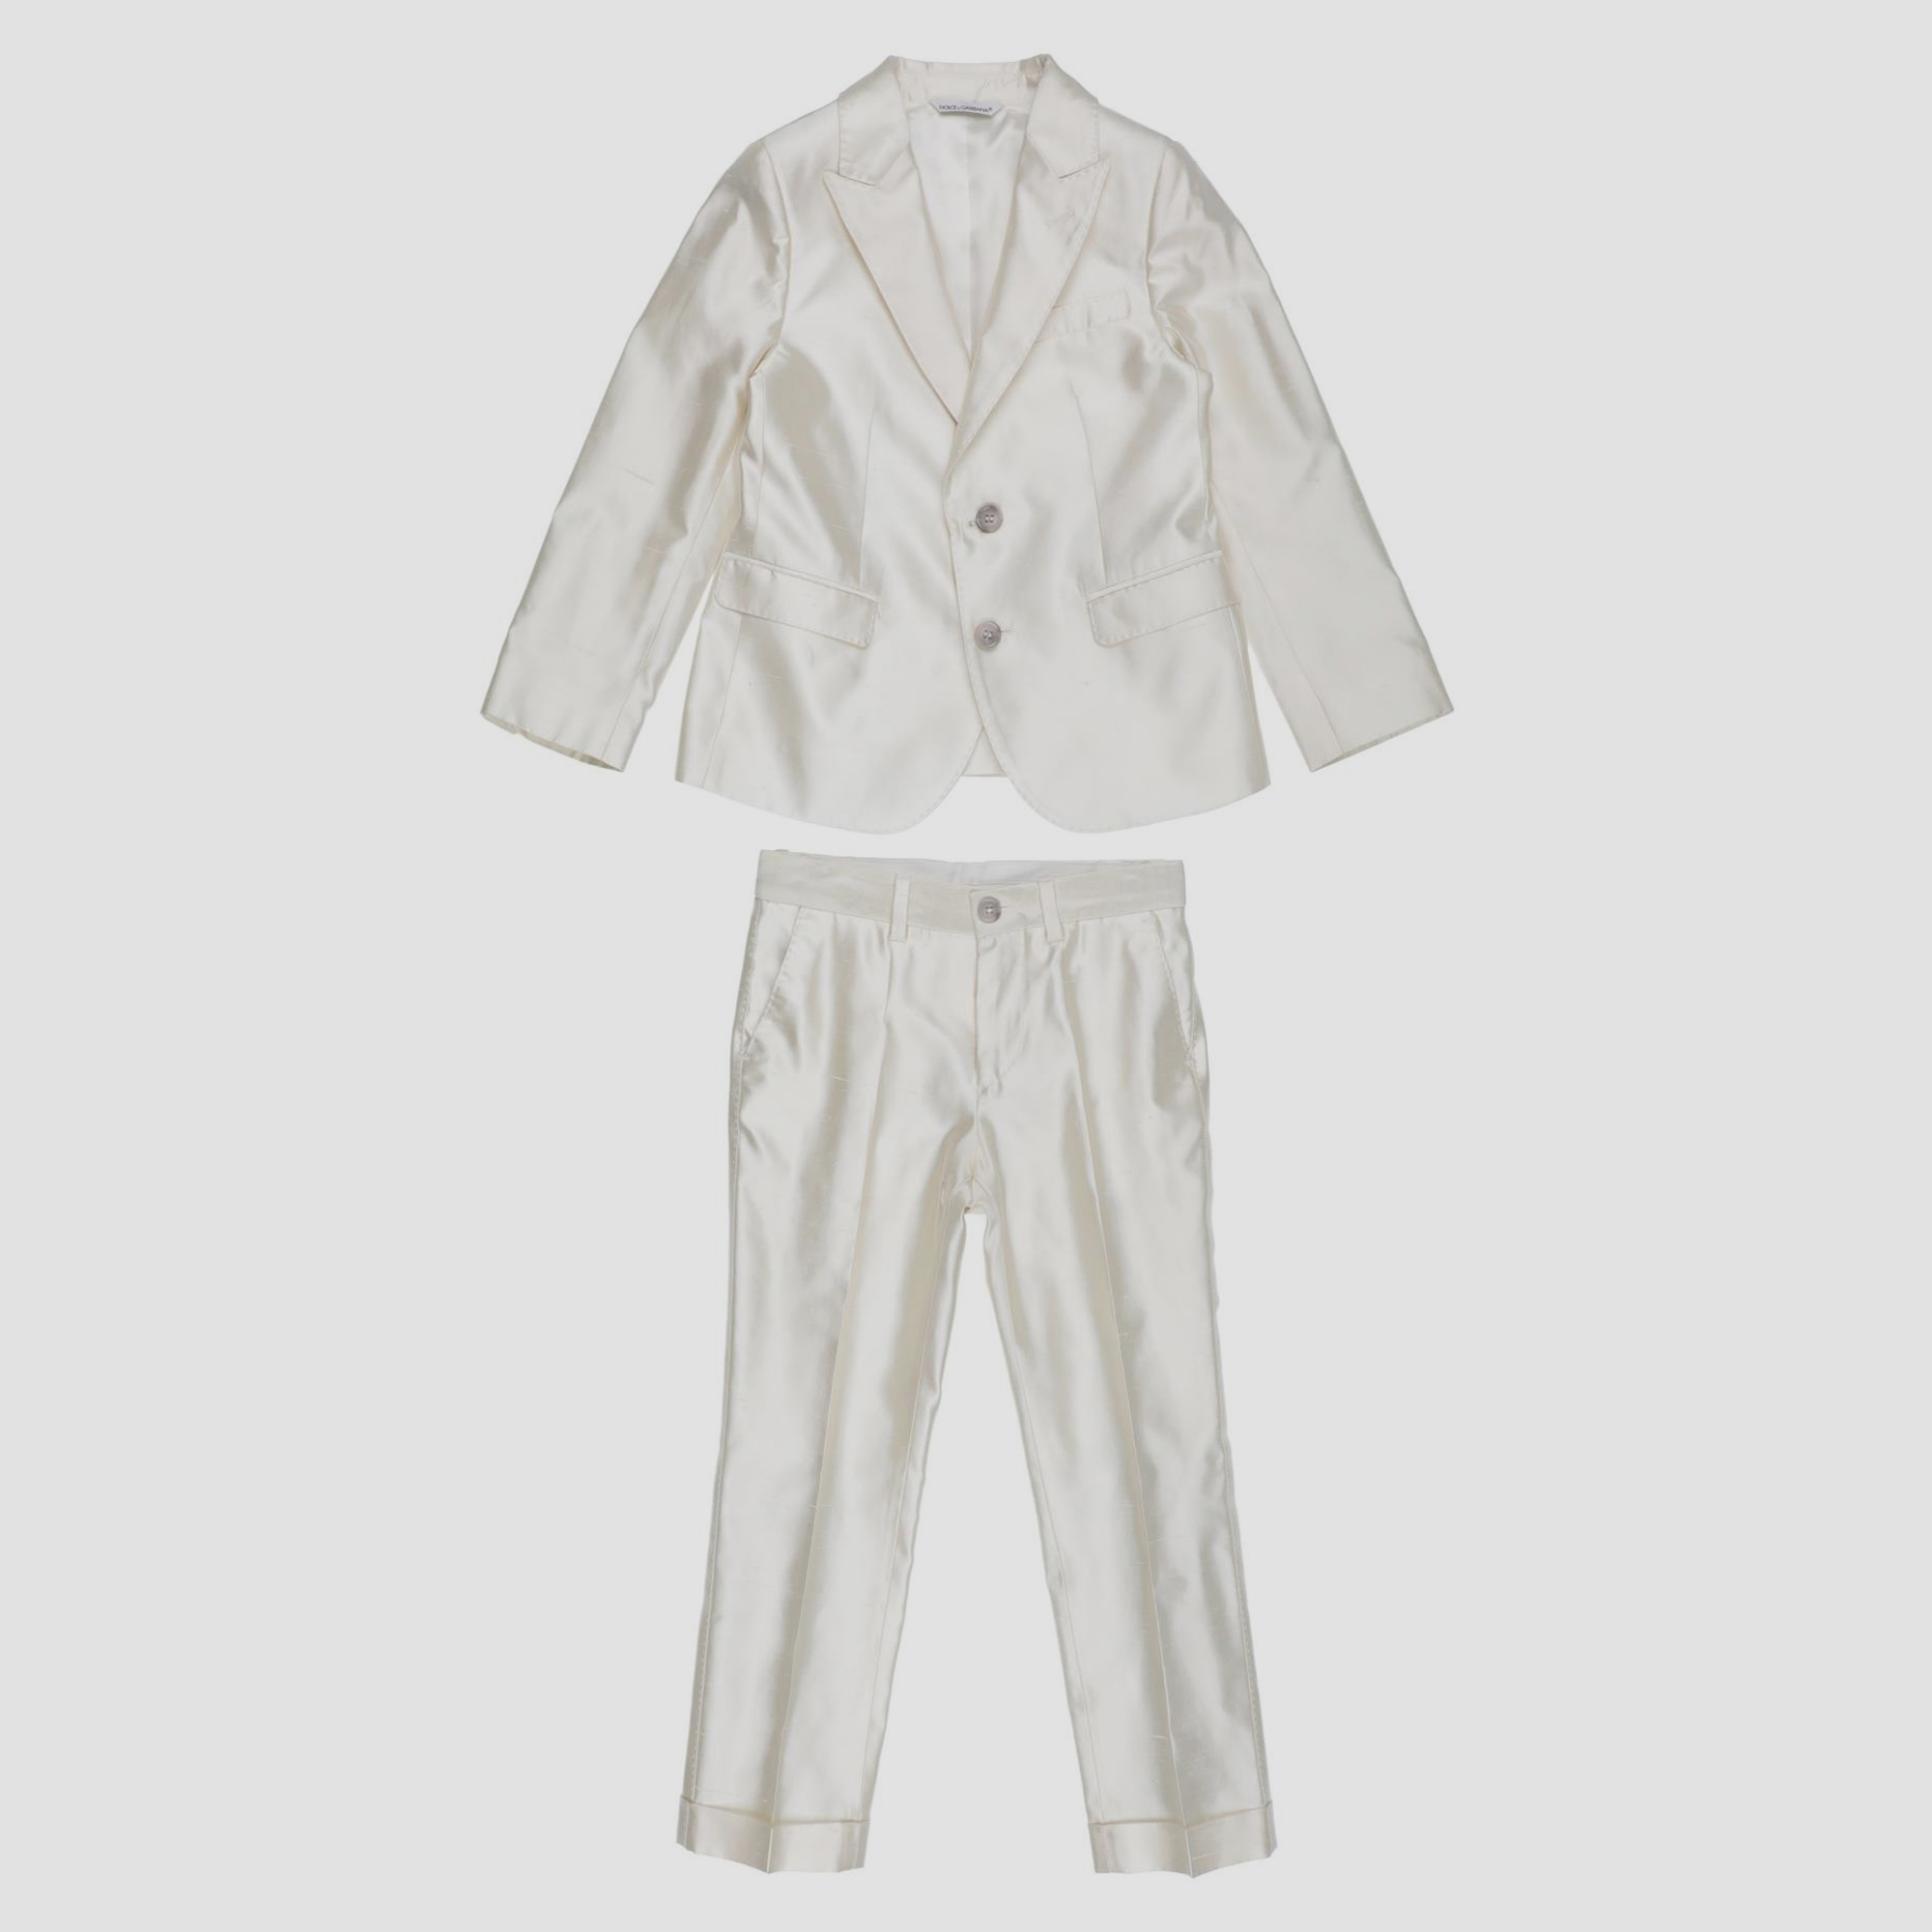 Tailored with care this suit for kids by Dolce and Gabbana is perfect for attending parties and other events. Can be styled with sneakers as well as loafers.